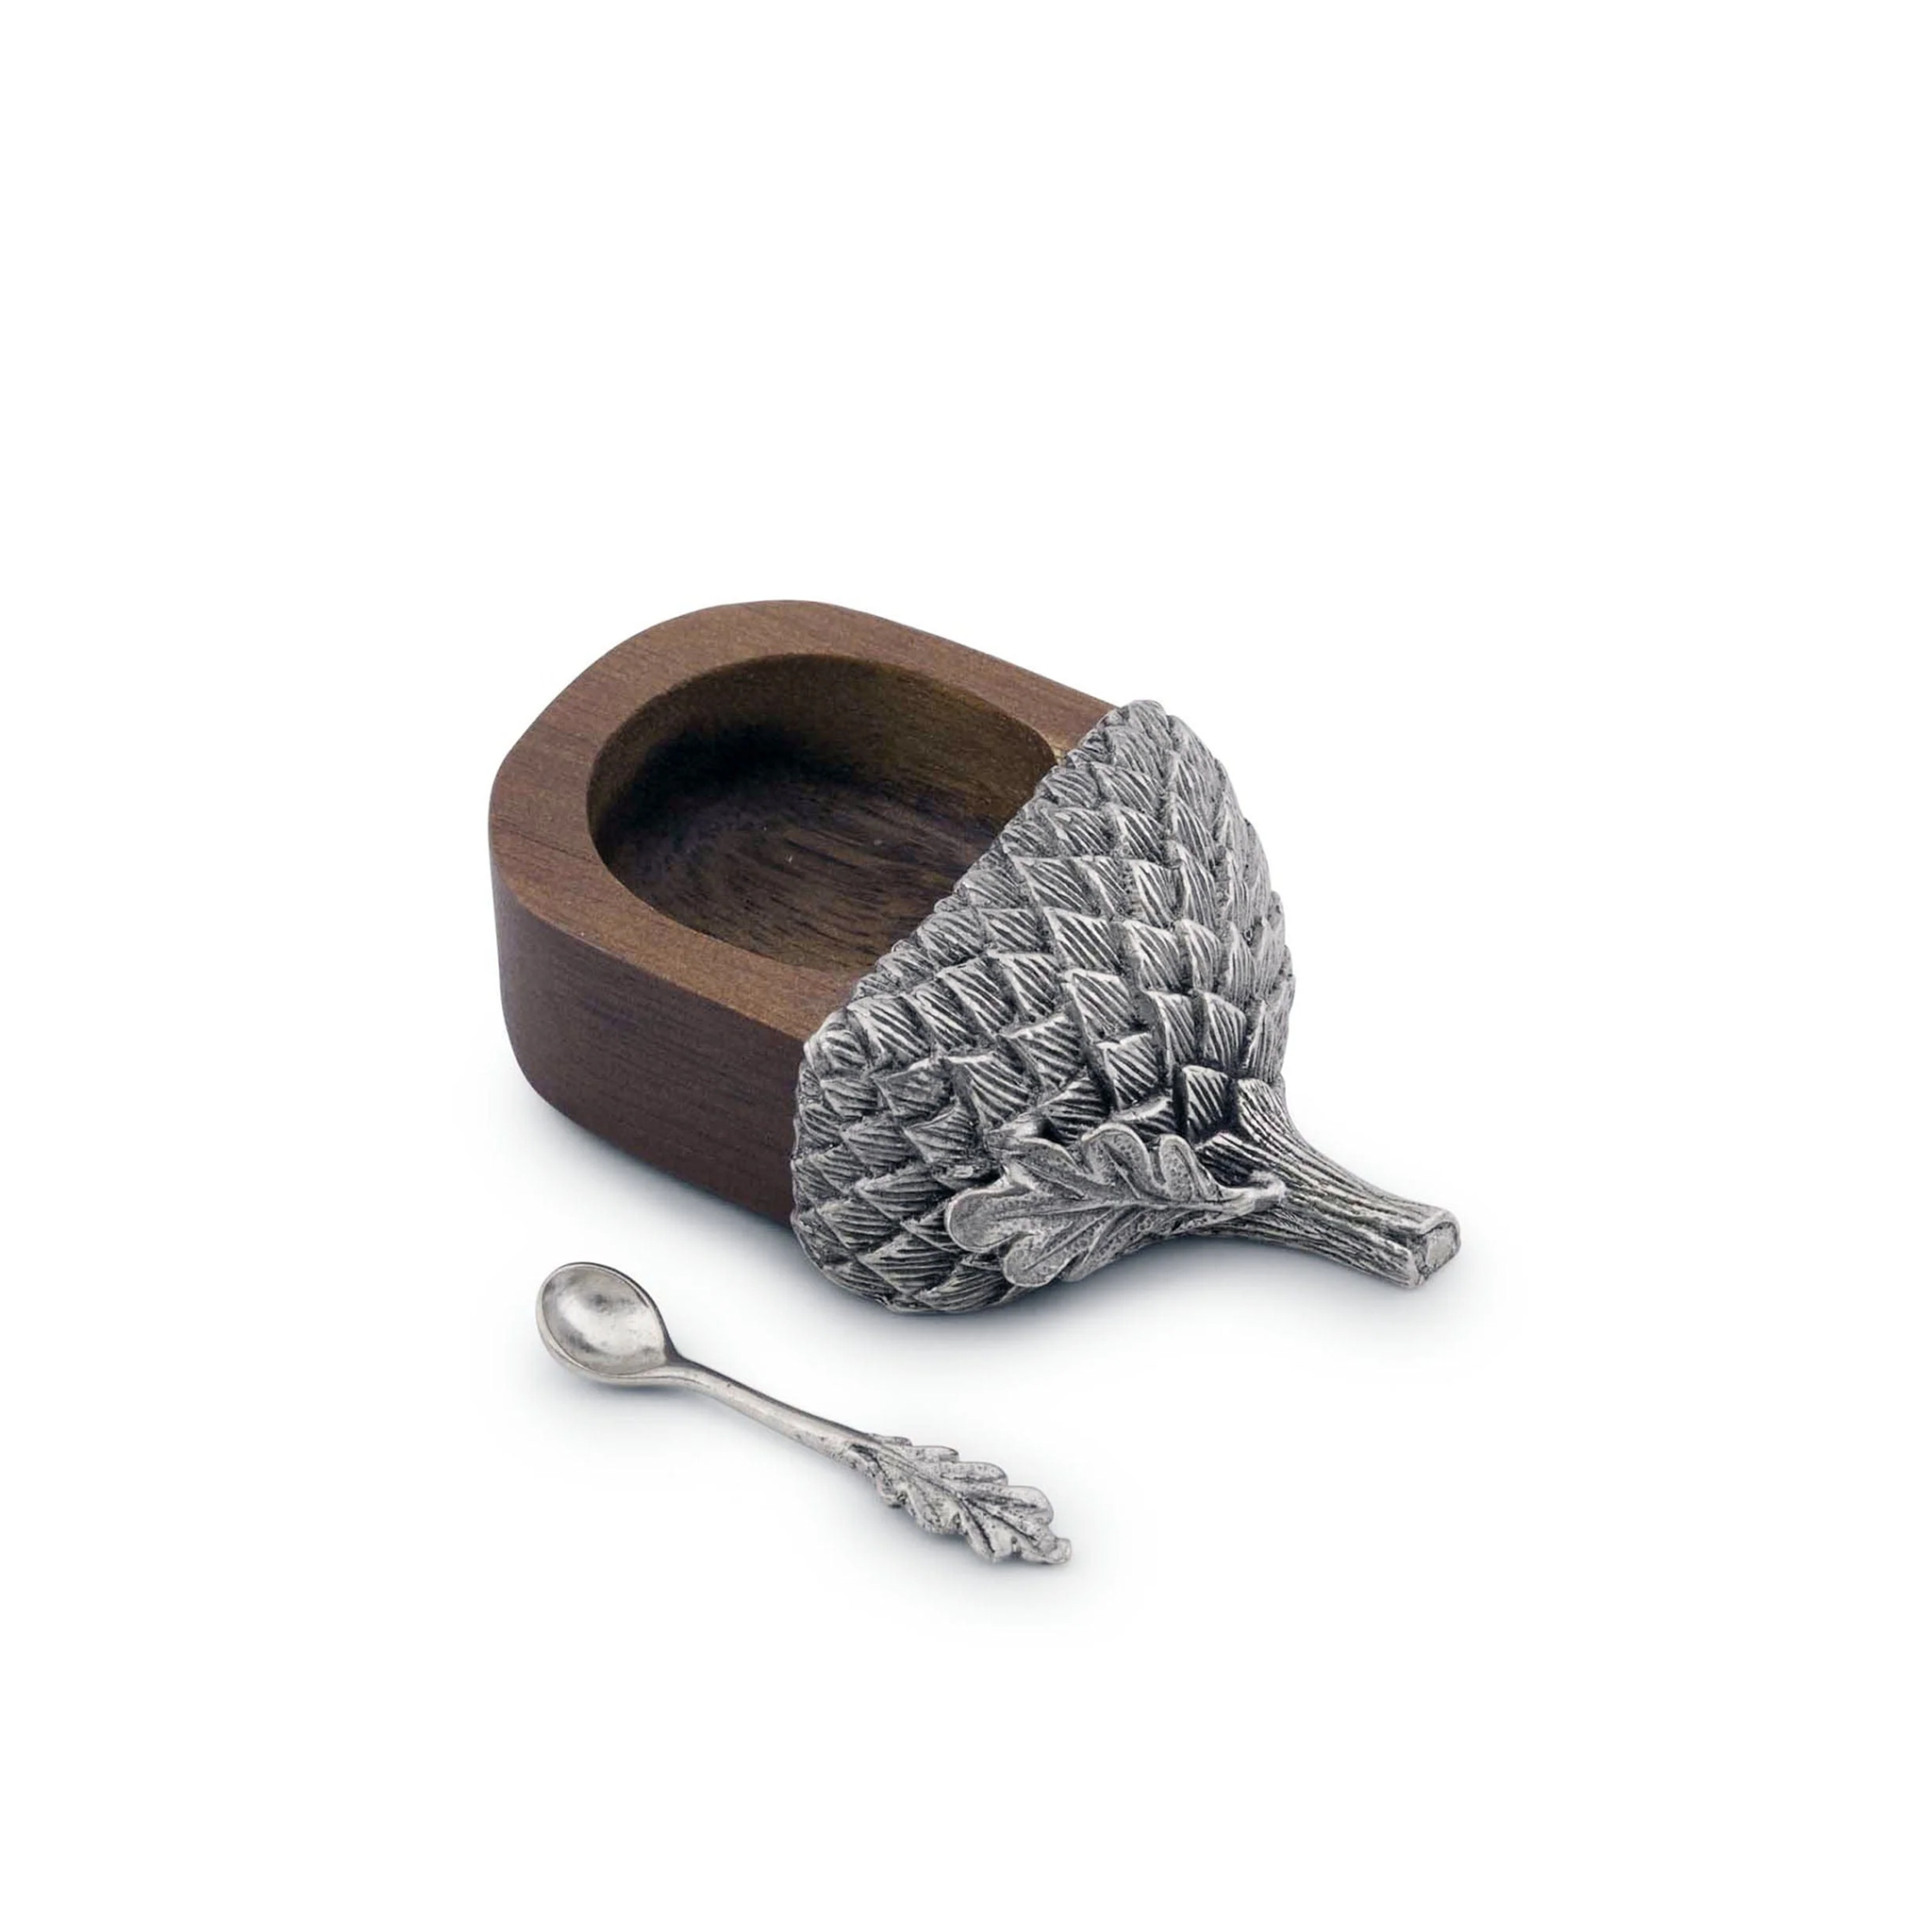 a small wooden acorn salt cellar with a silver spoon with a pewter cap on it on a white background